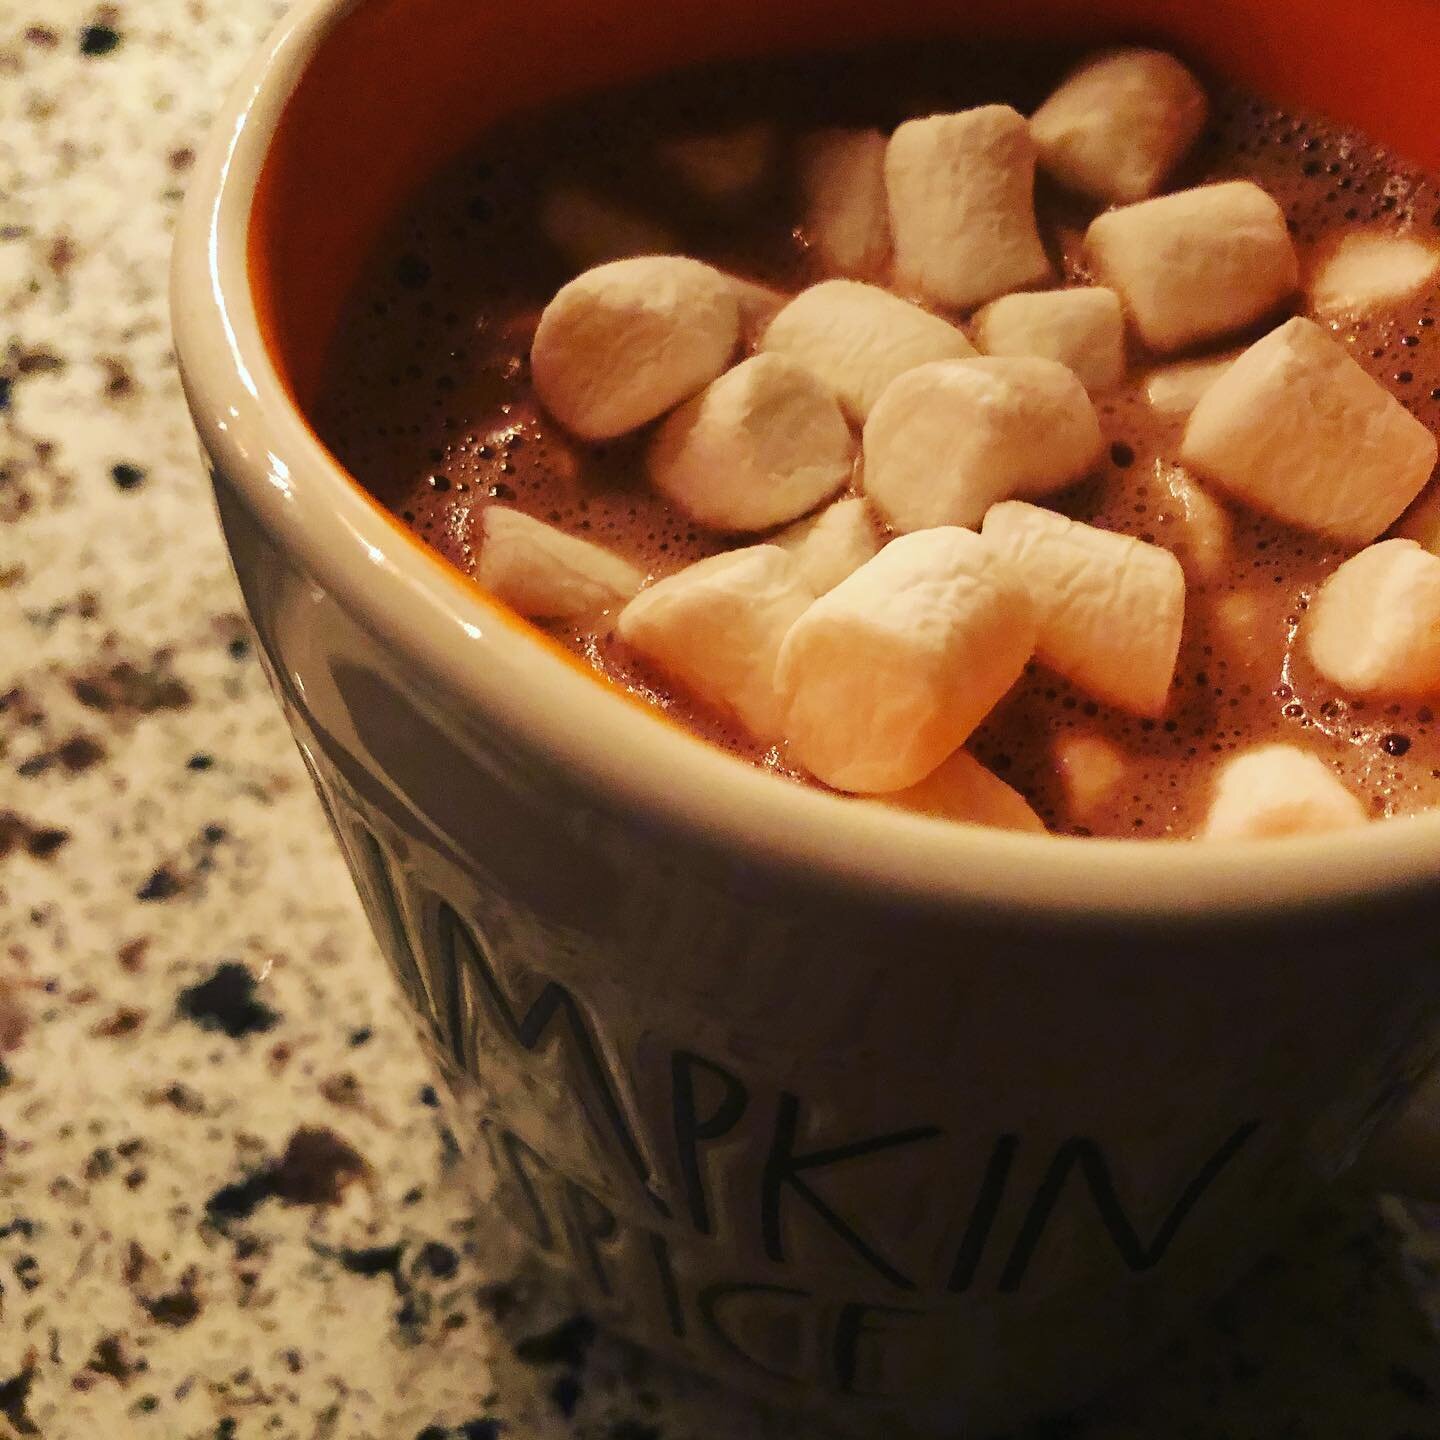 Labor Day has never had such a big Summer-Is-Over-Vibe than it does right now at 64&deg; and with a big mug of pumpkin hot cocoa. #cozy #hotchocolate #koshermarshmallows #pumpkinspice #chilly